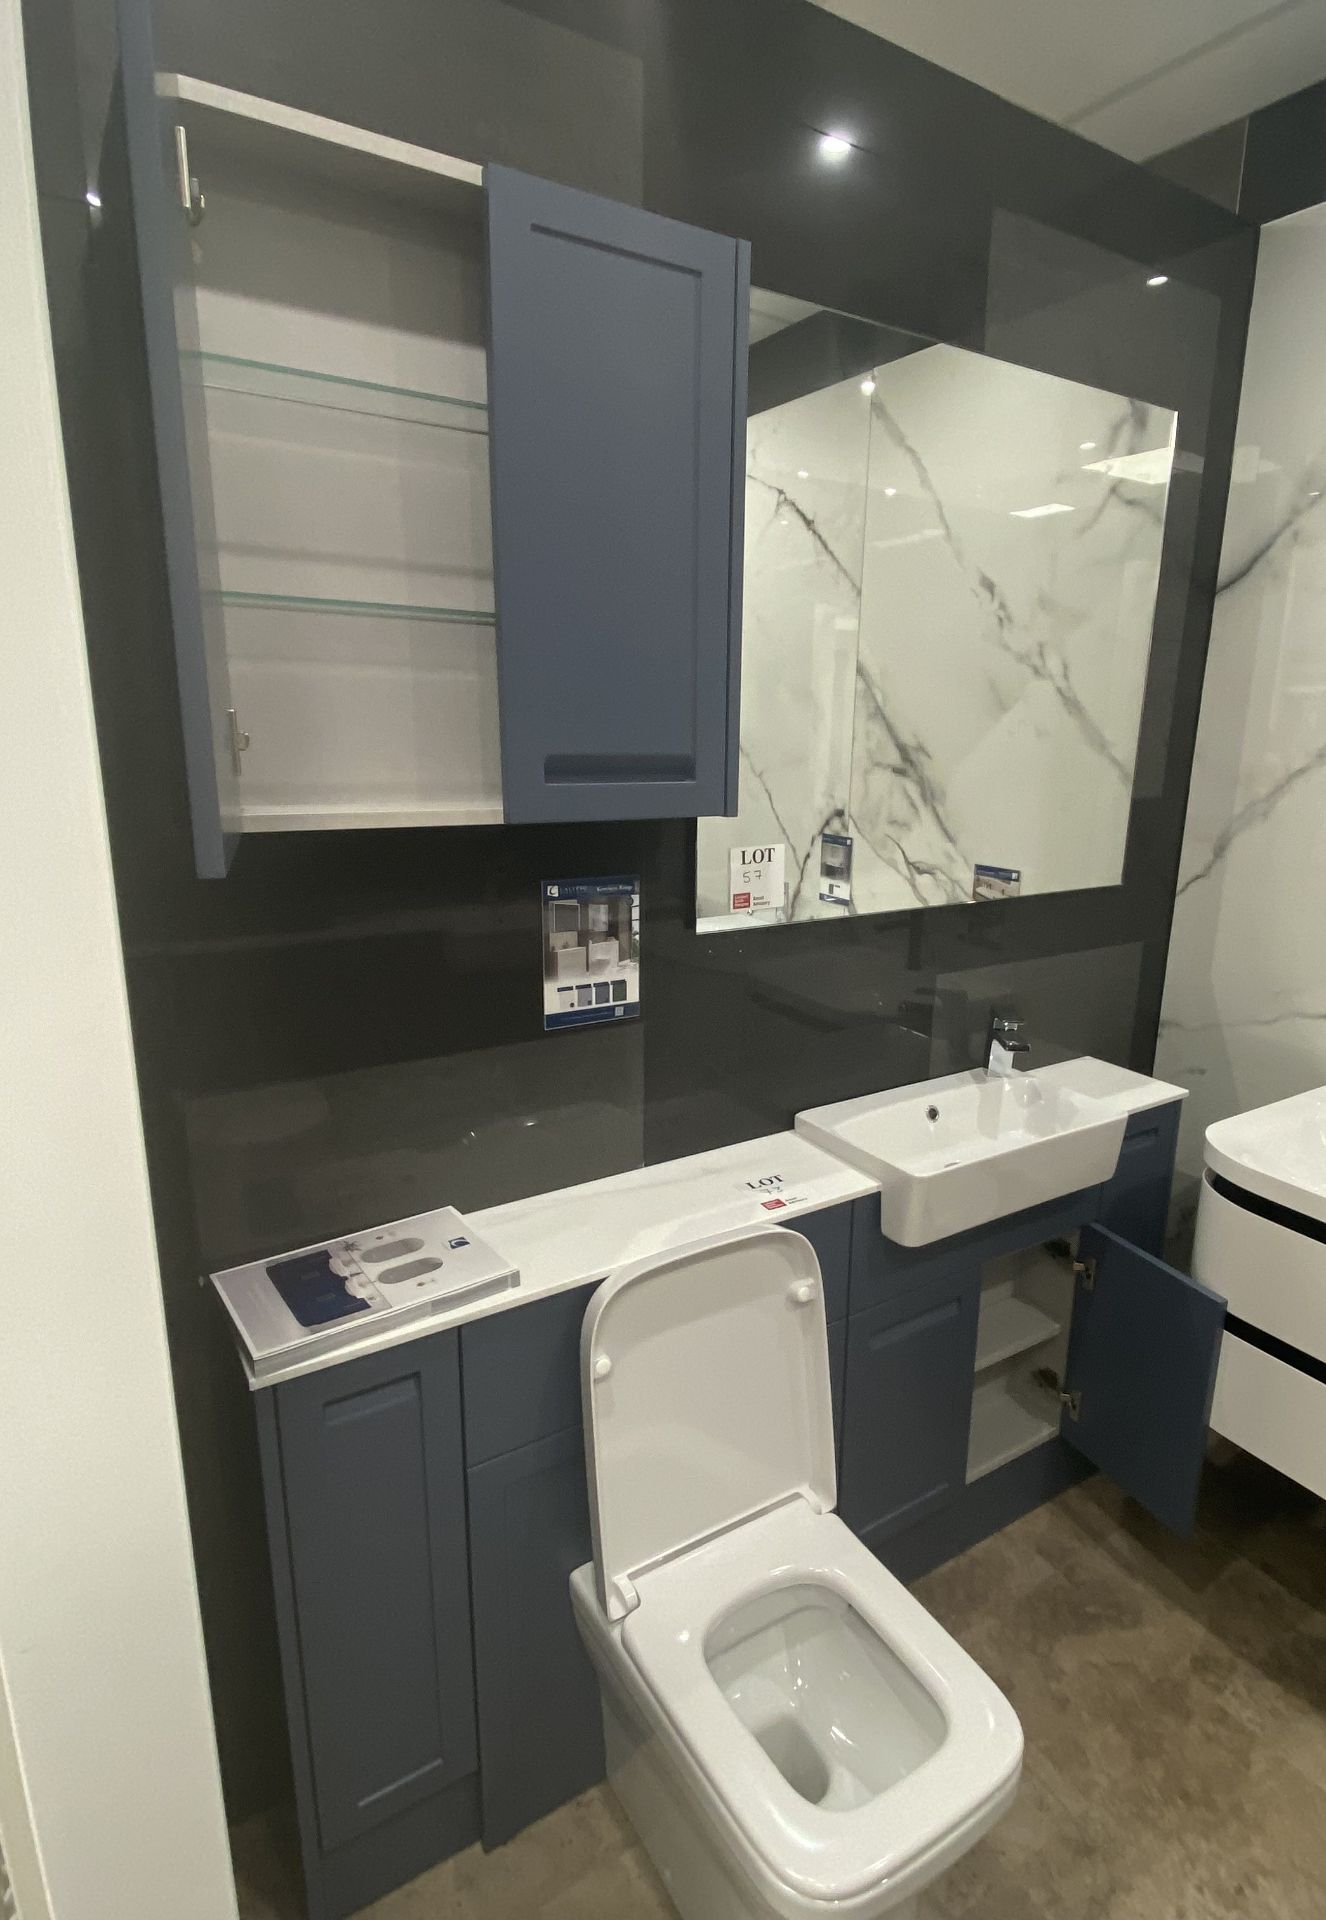 Calypso Kentmere Range display bathroom to include toilet bowl unit, fitted worktop with 8 cupboards - Image 3 of 4